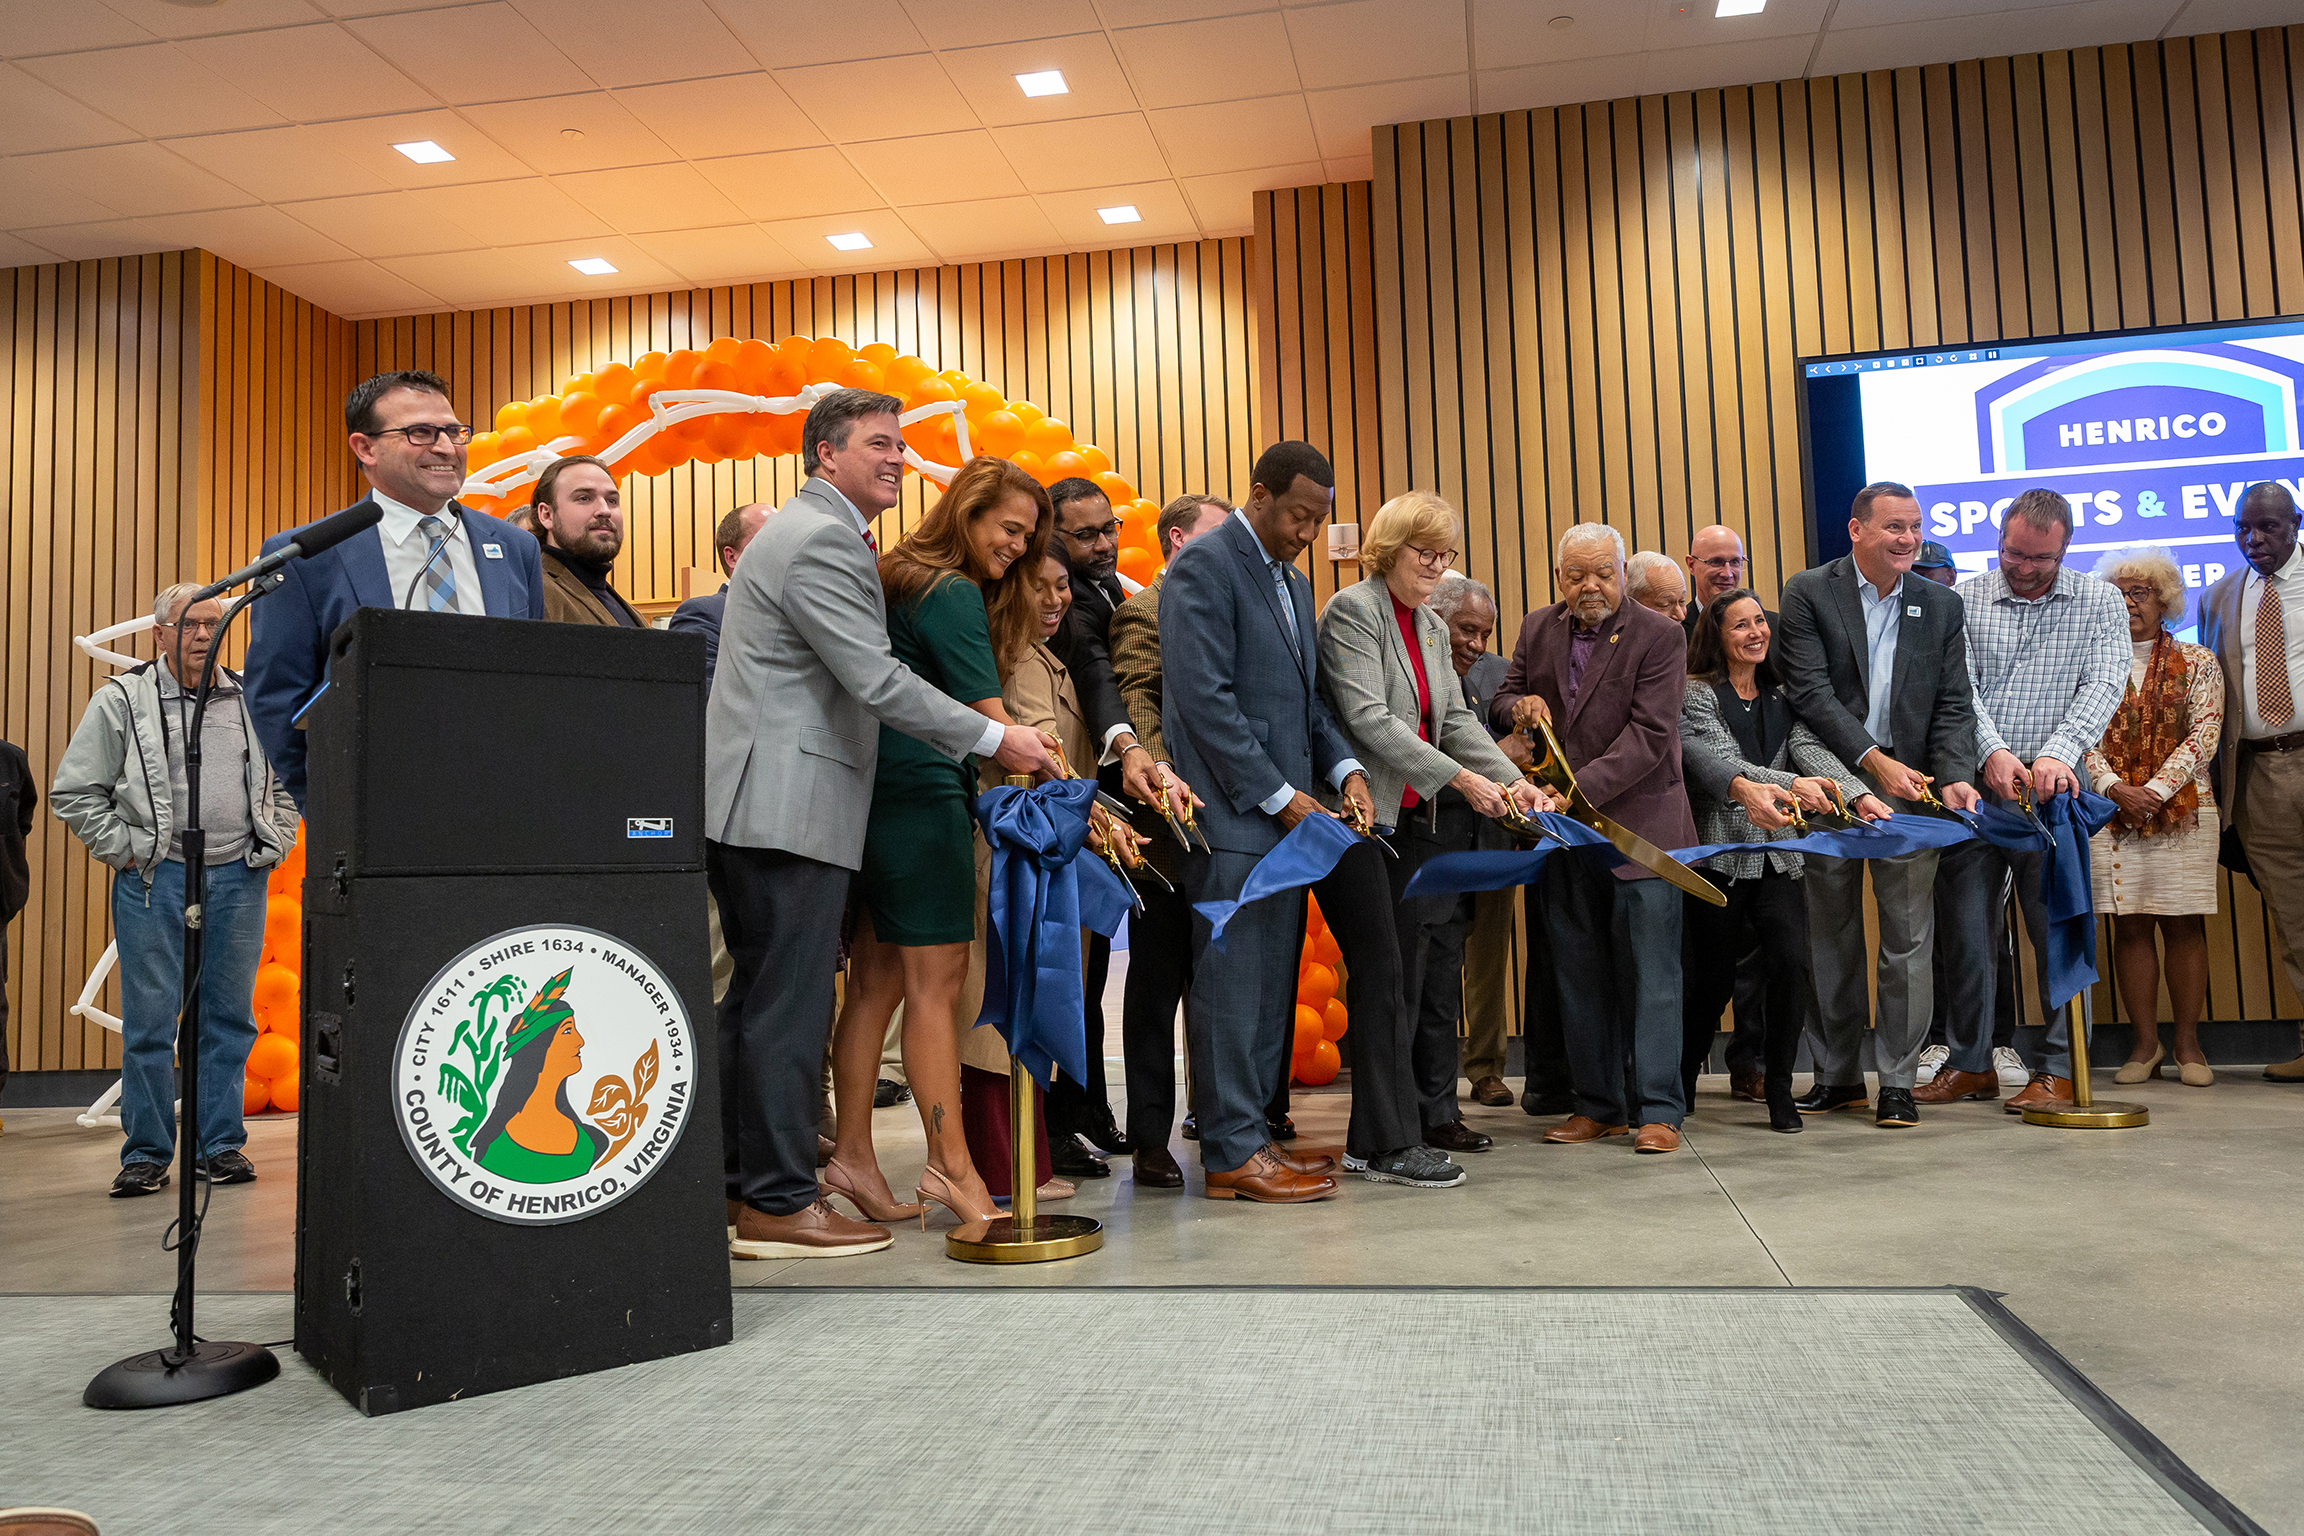 Ribbon-cutting at Sports & Events Center